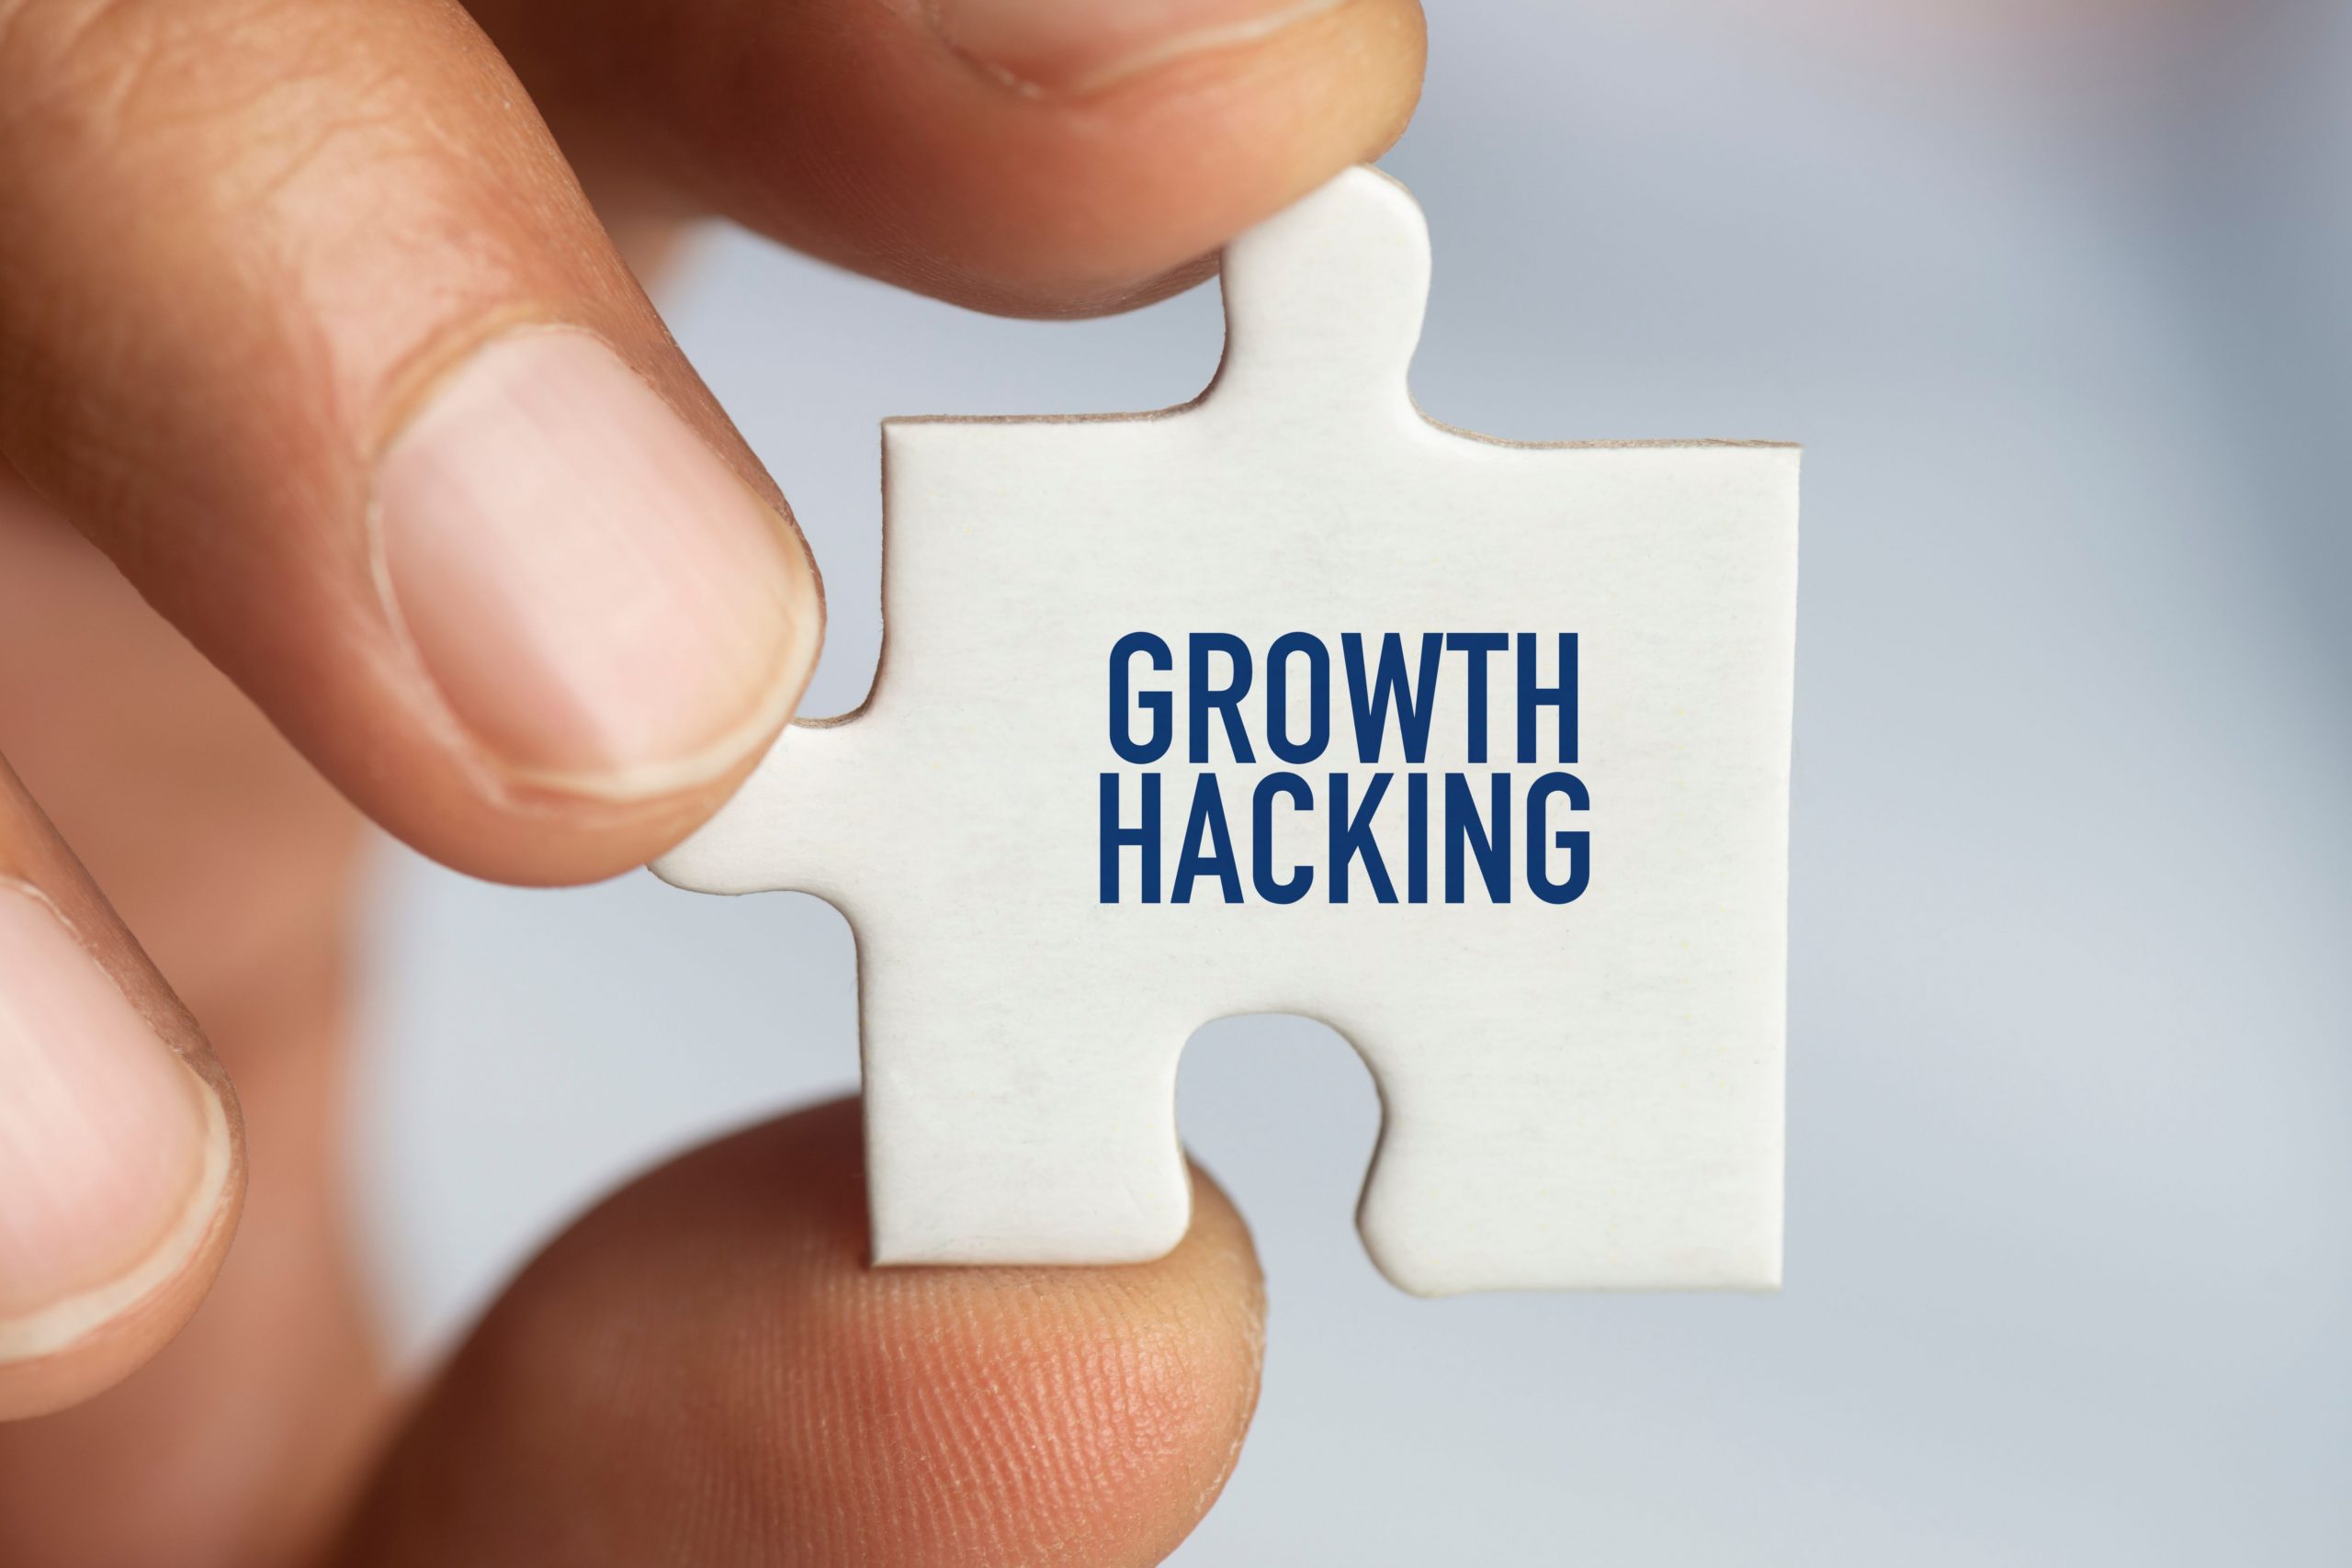 What is B2B Growth Hacking?